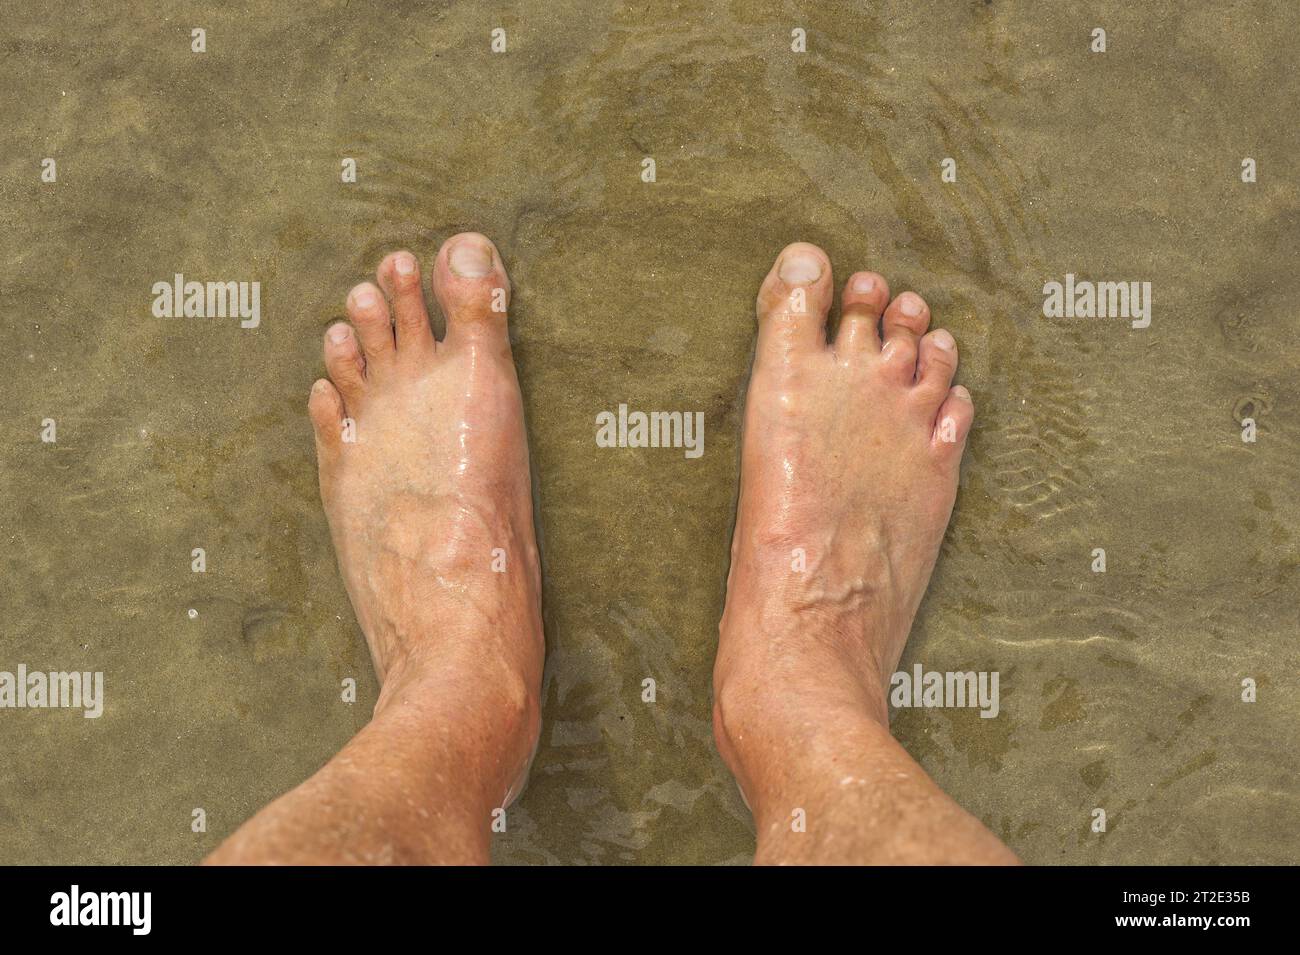 Pair of adult male feet on sandy beach with clear water washing over. Stock Photo